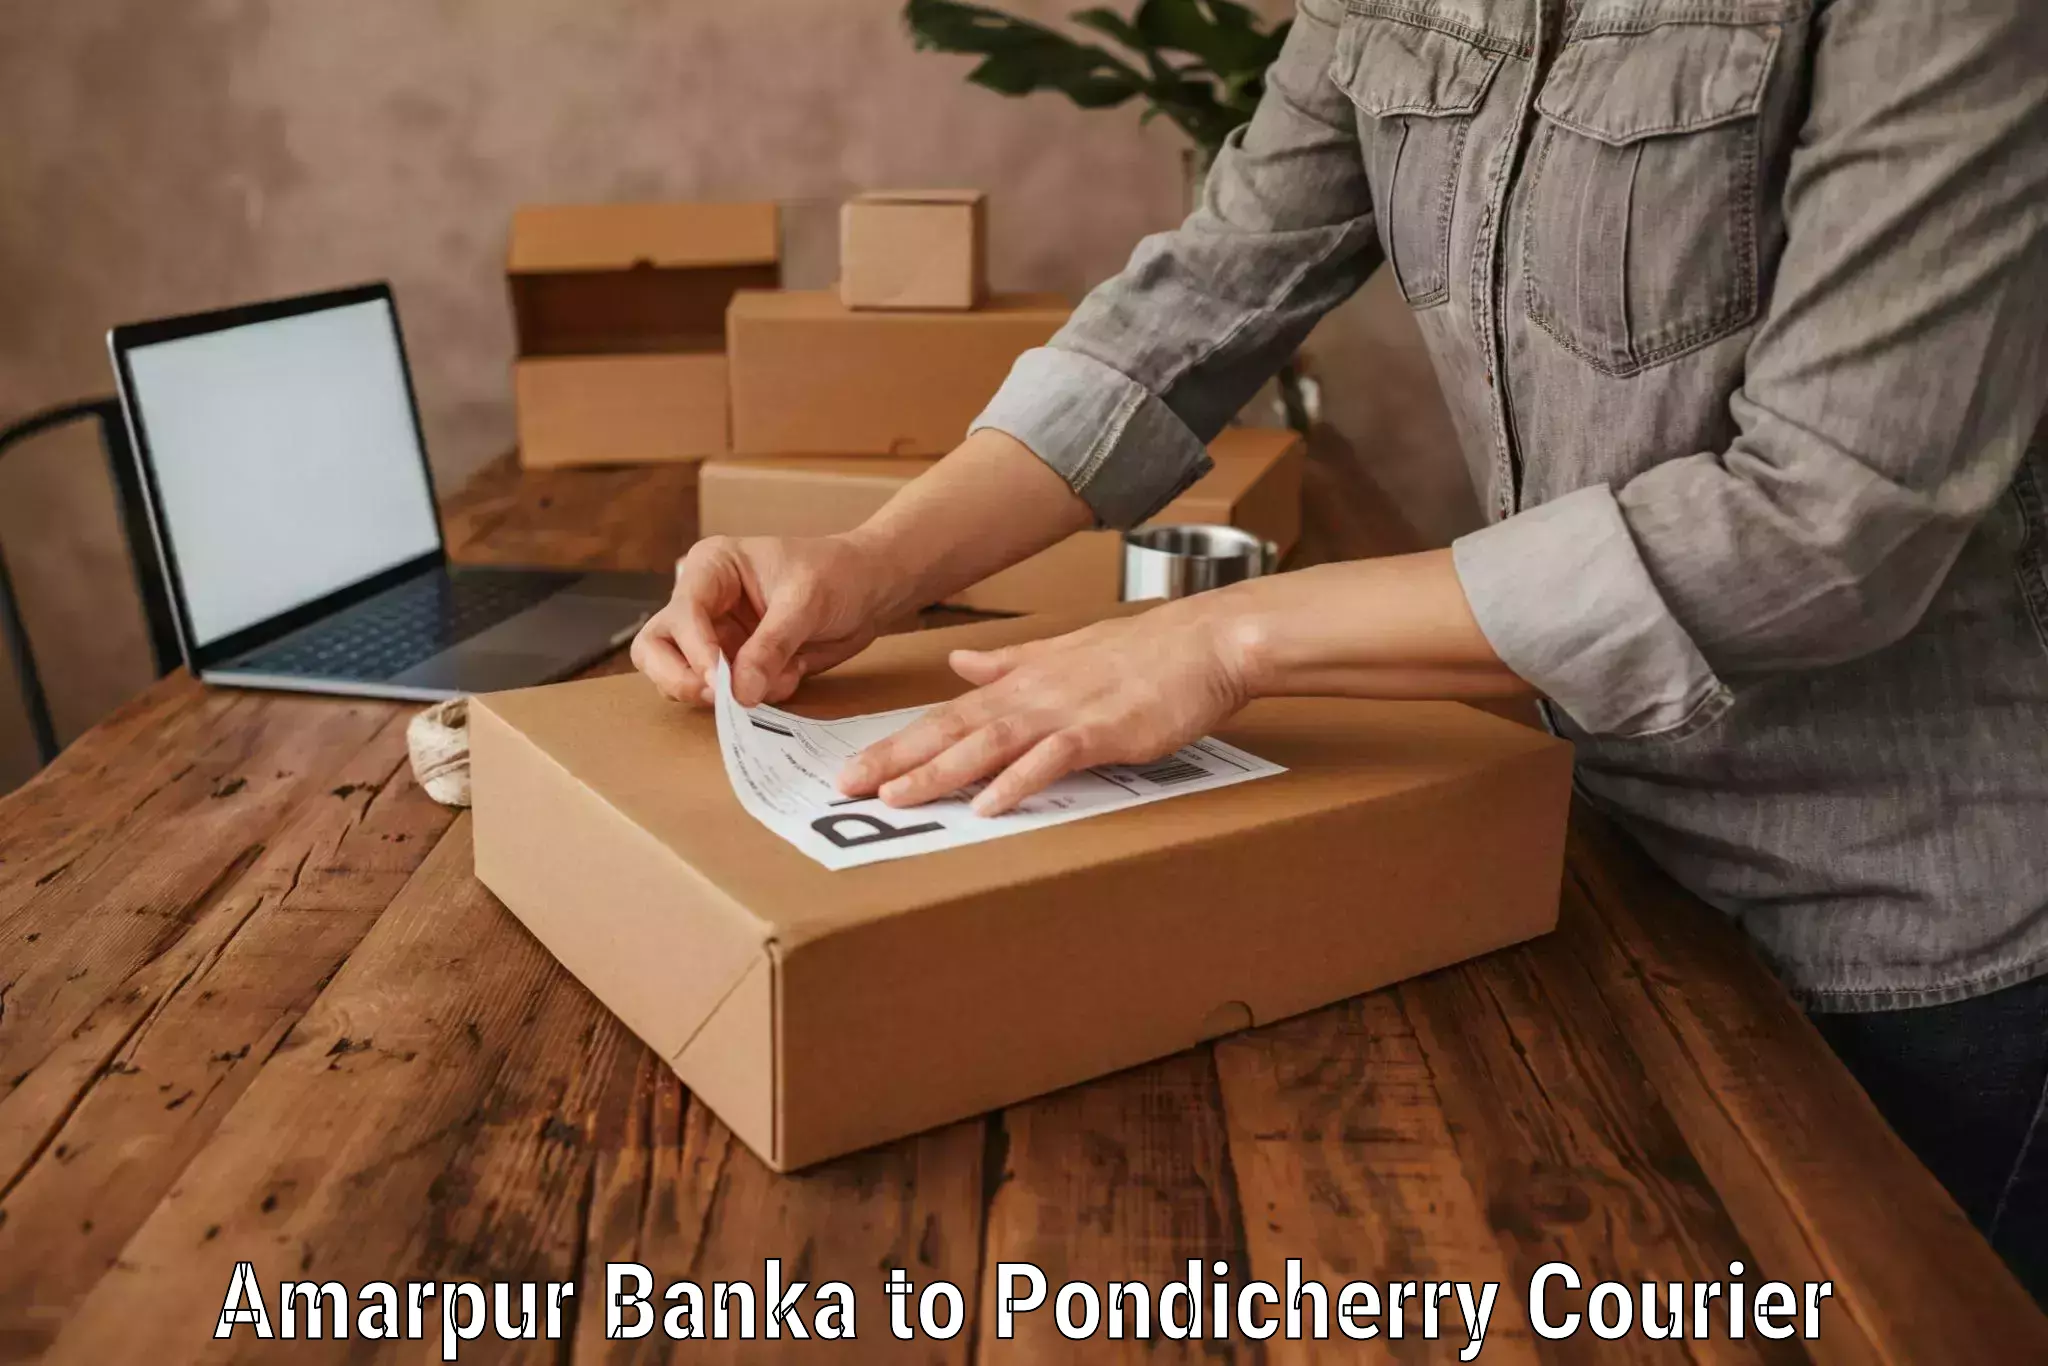 Personal effects shipping in Amarpur Banka to Pondicherry